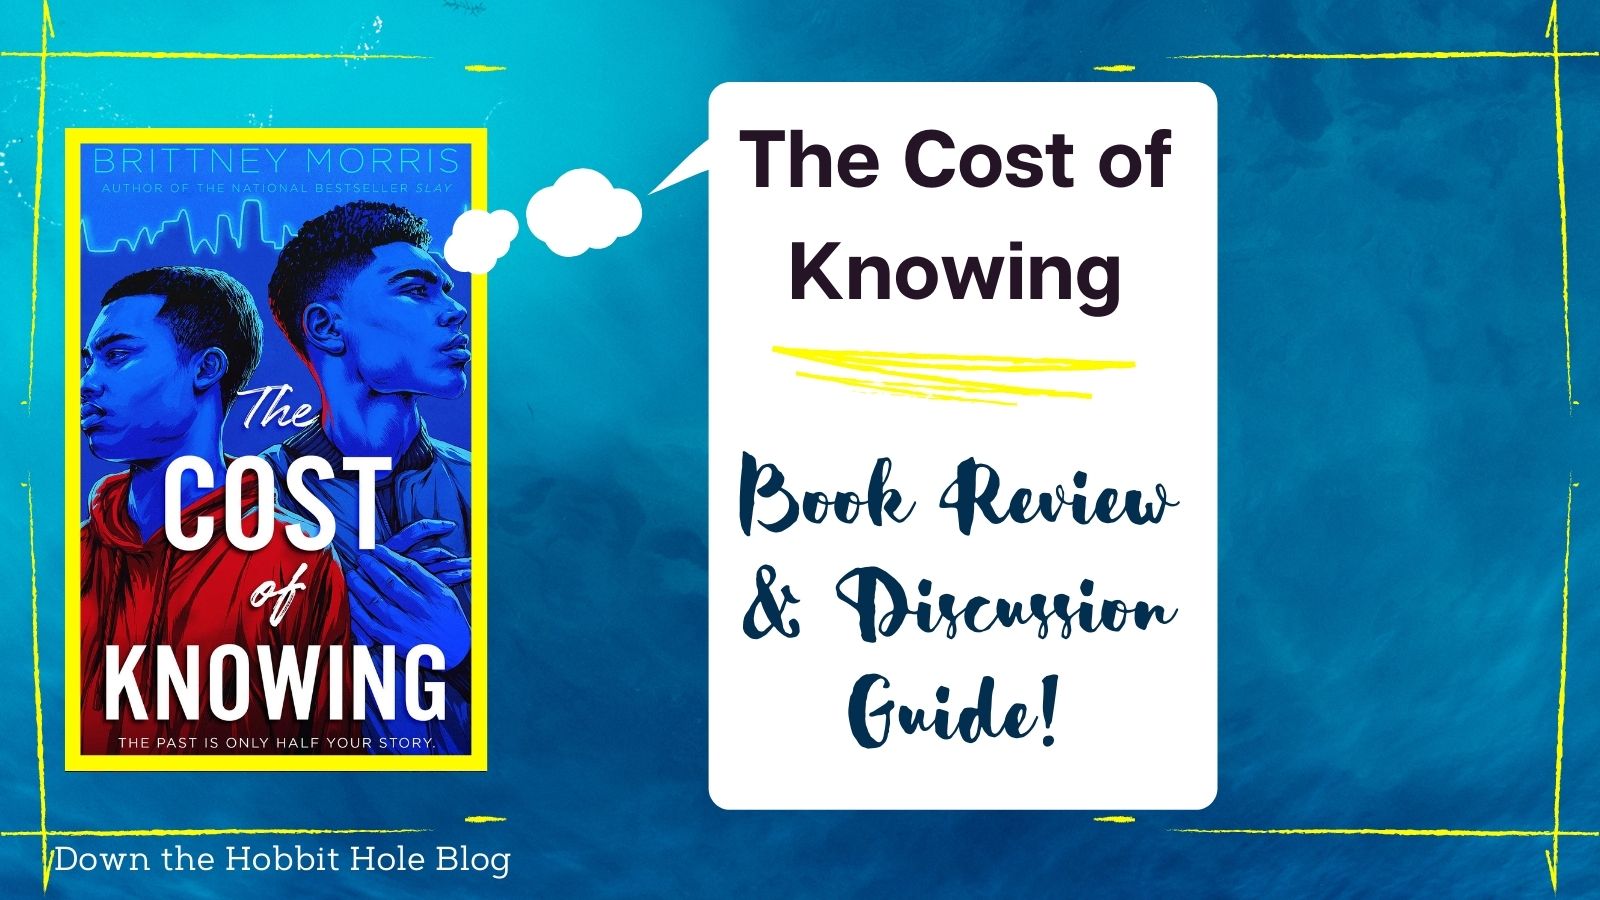 the cost of knowing by brittney morris